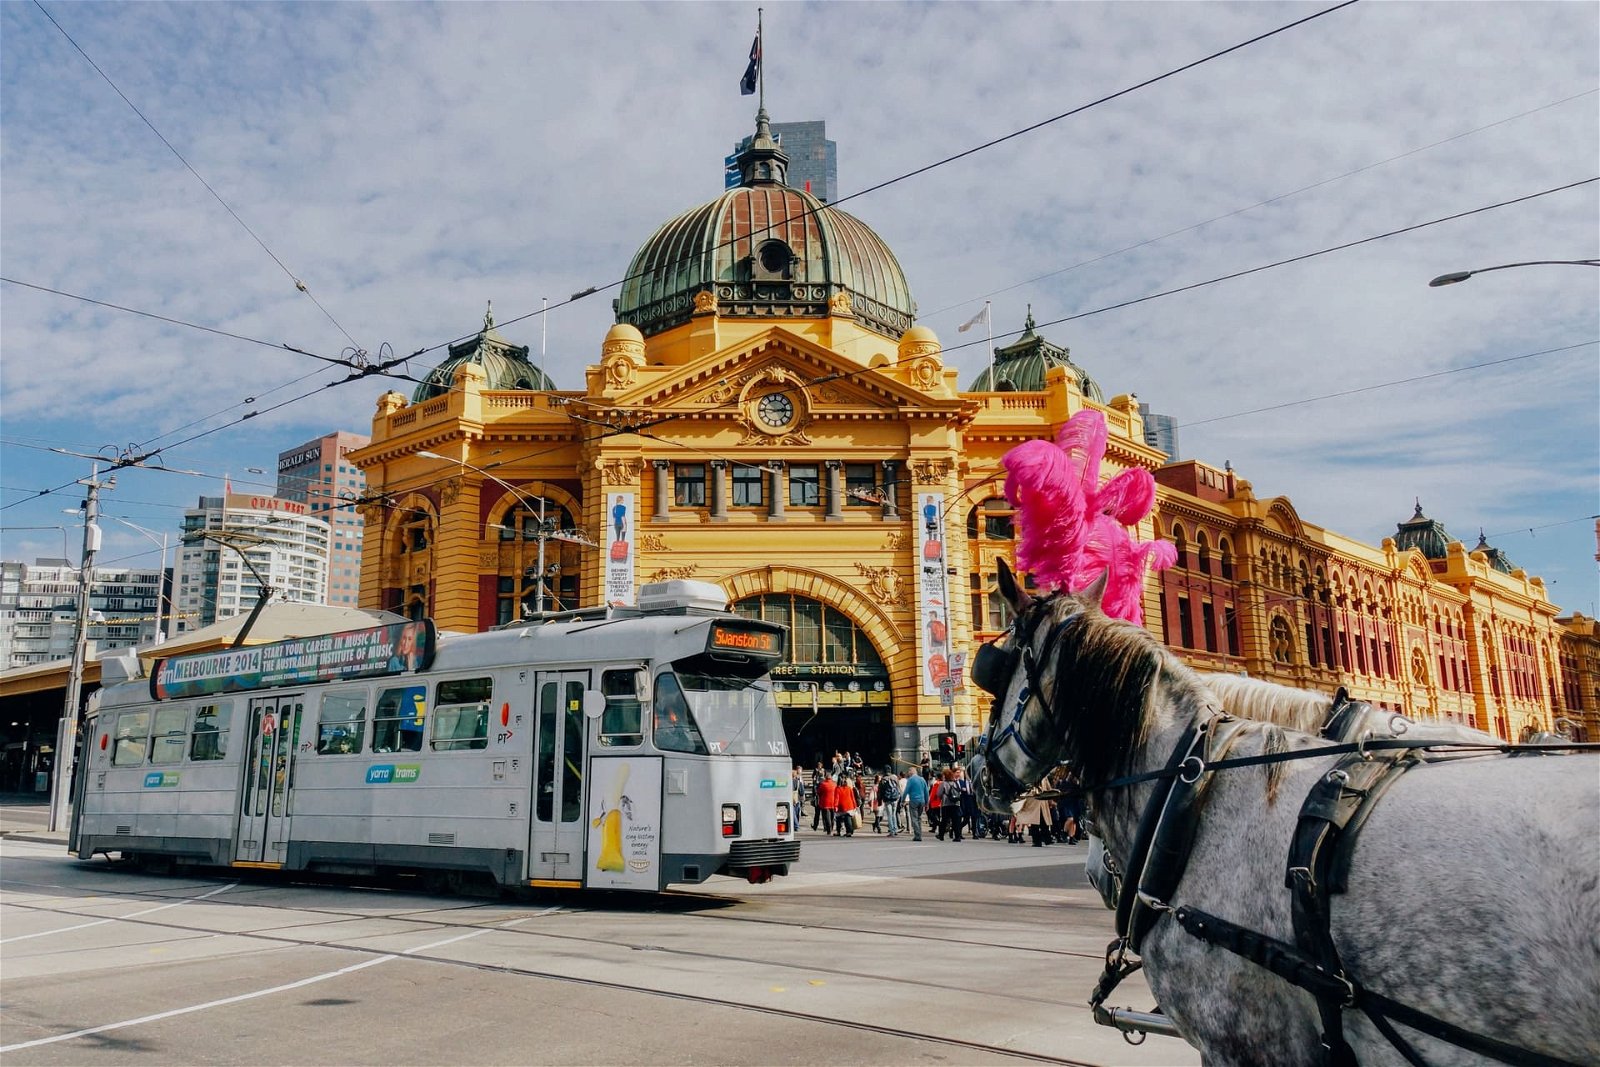 18 reasons to start your Gap Year in Melbourne